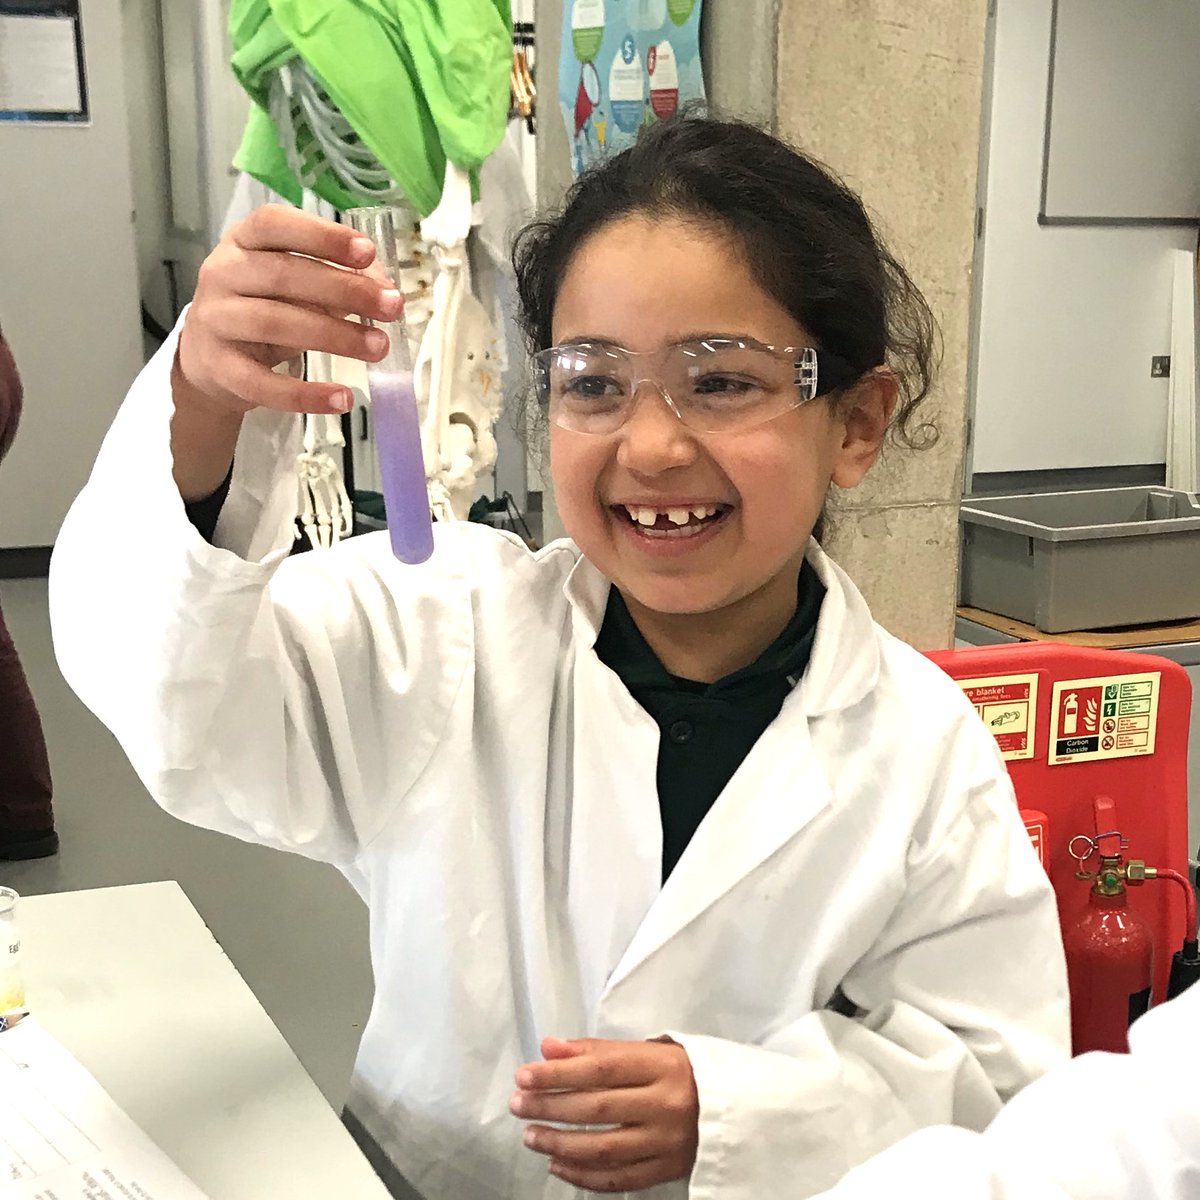 Our gut feeling is that Year 4 had a fantastic time learning about the digestive system during their Abingdon Science Partnership visit! #ManorPrep #STEM #science #education #learning #learningisfun #independentschool